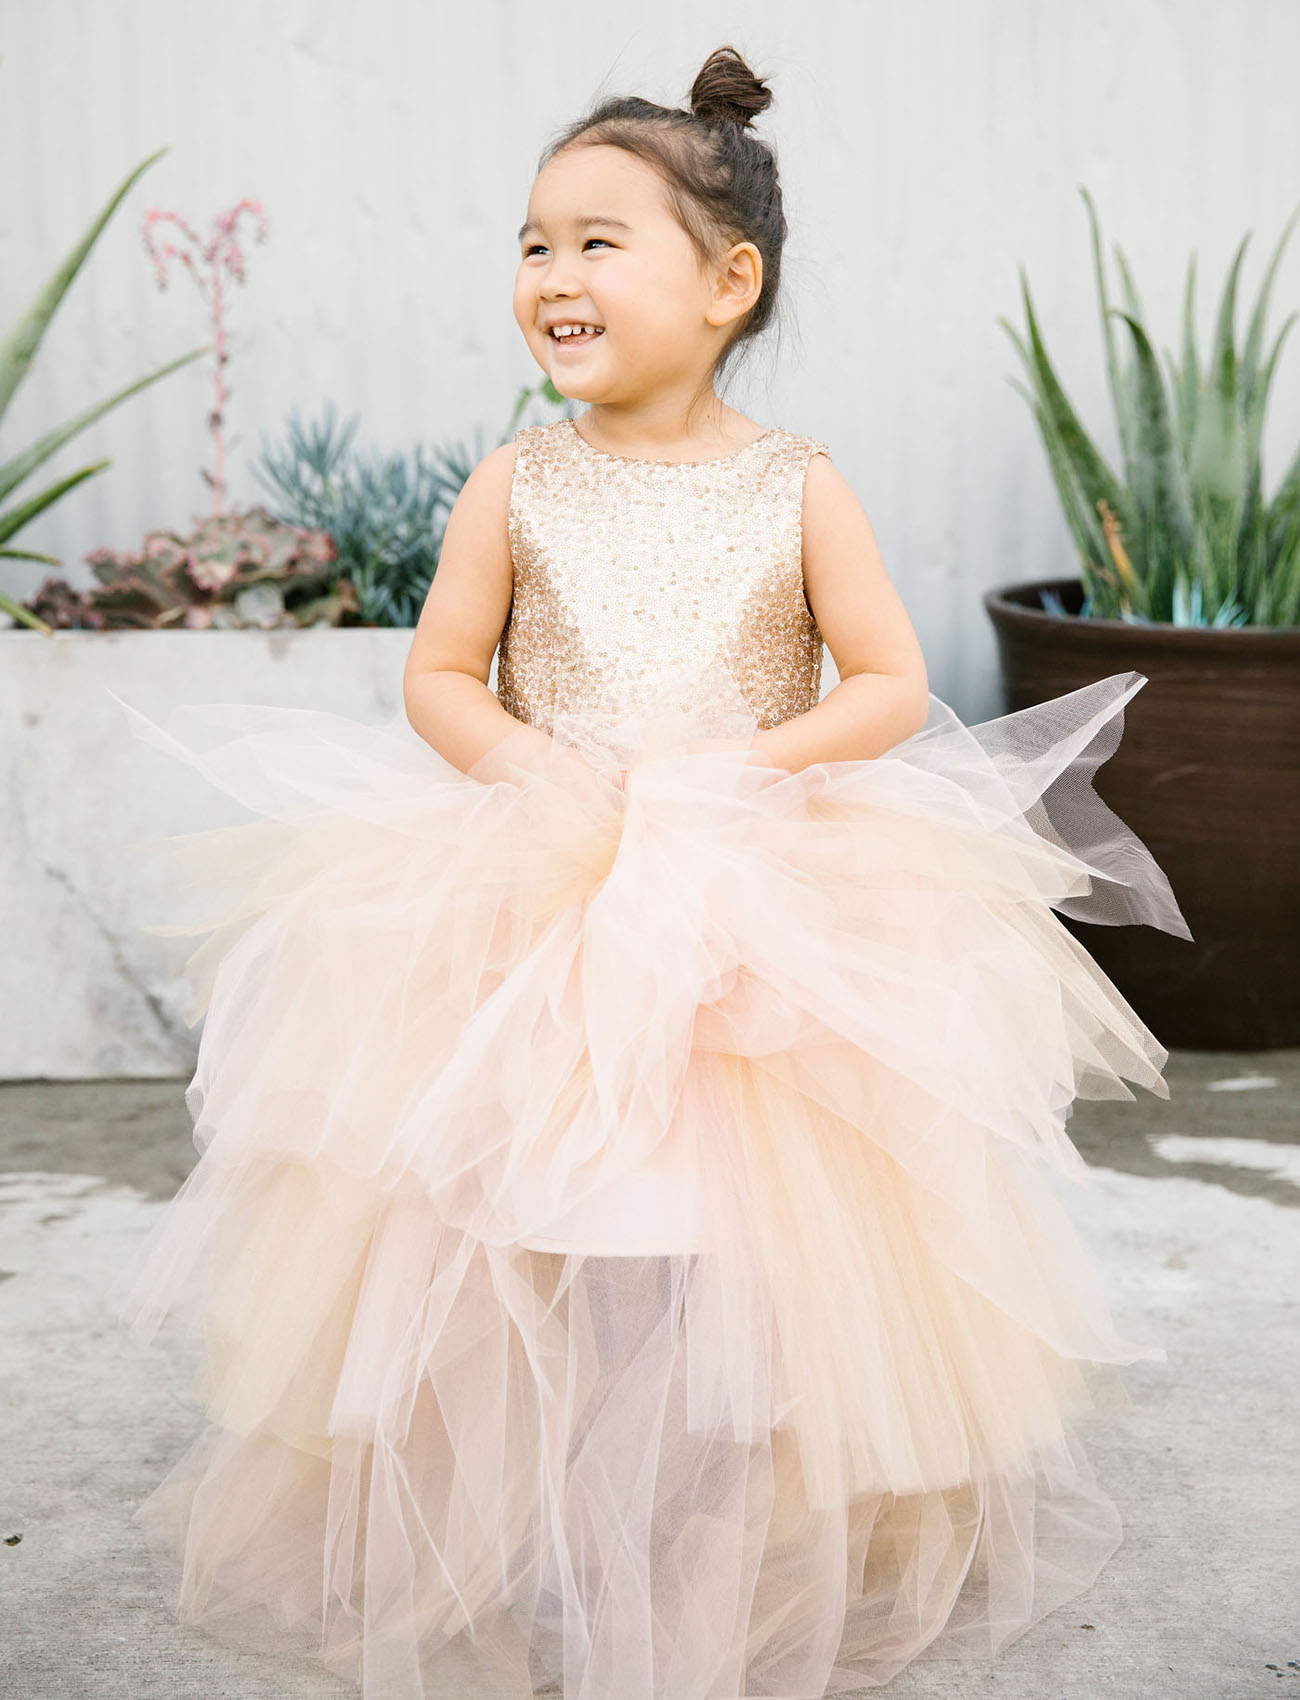 The flower girl in sequins and tulle by Miss Tashina looked heavenly